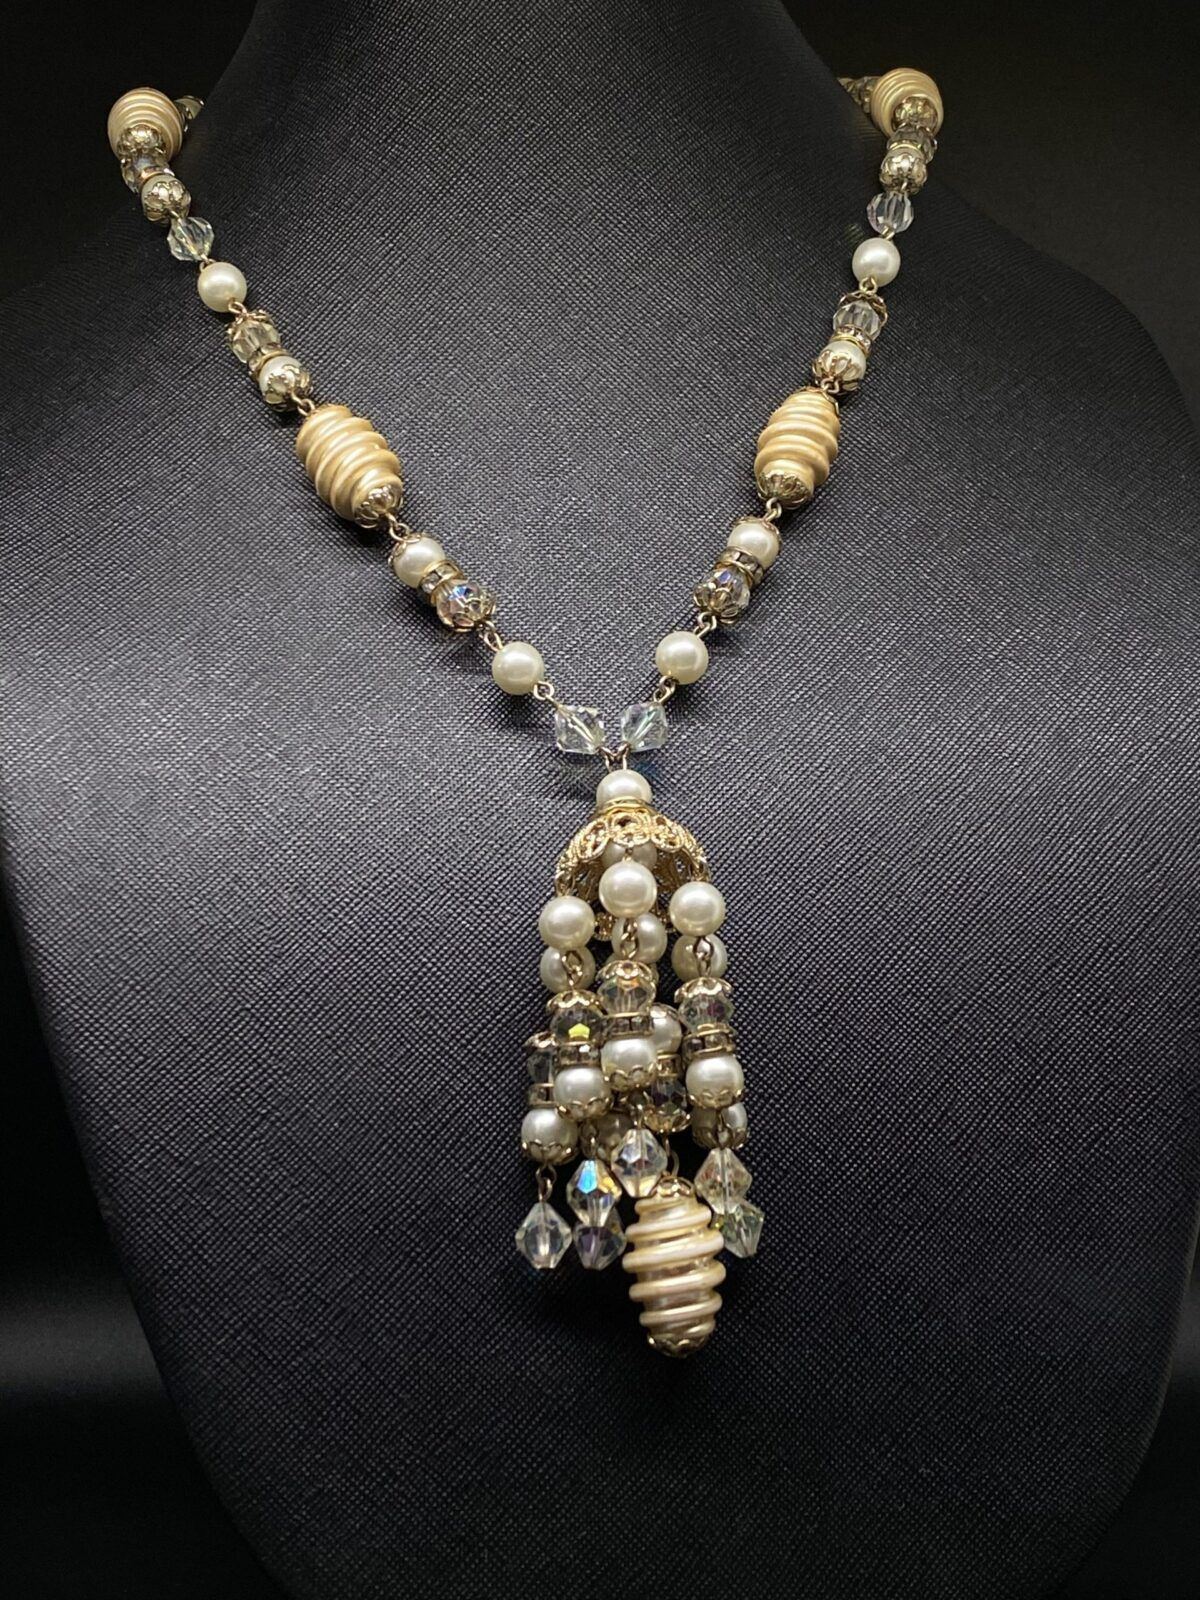 1960s Faux Pearl and Crystal Tassel Necklace with Rondels